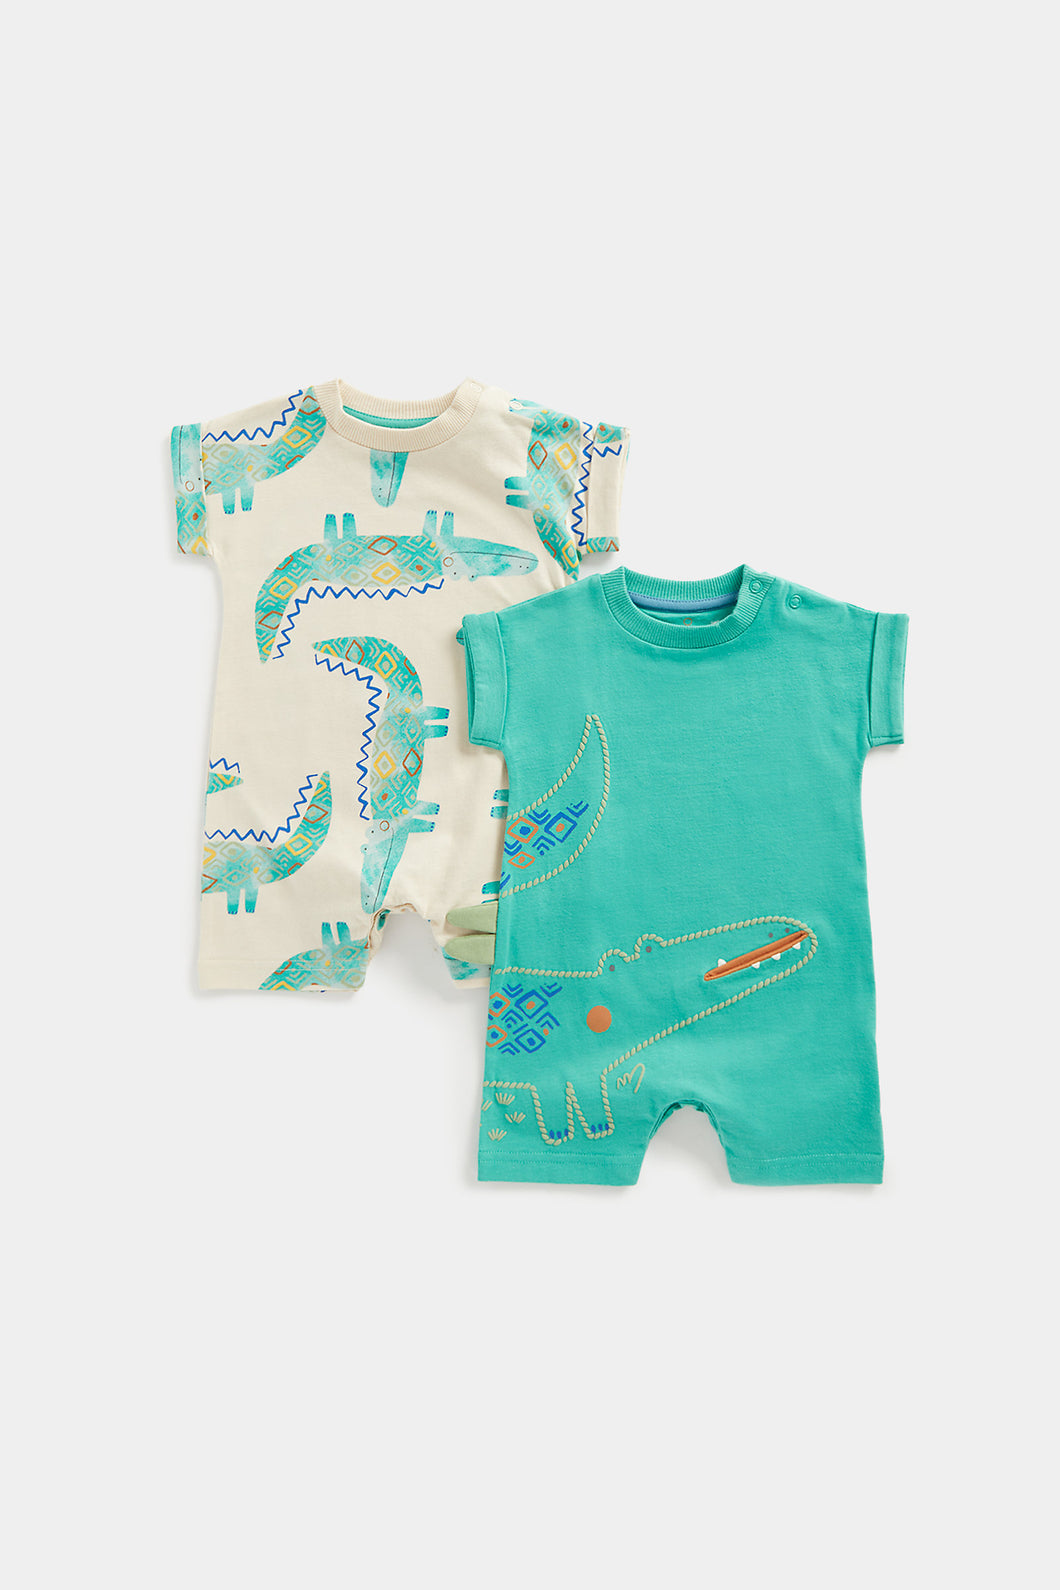 Mothercare Crocodile Rompers - 2 Pack